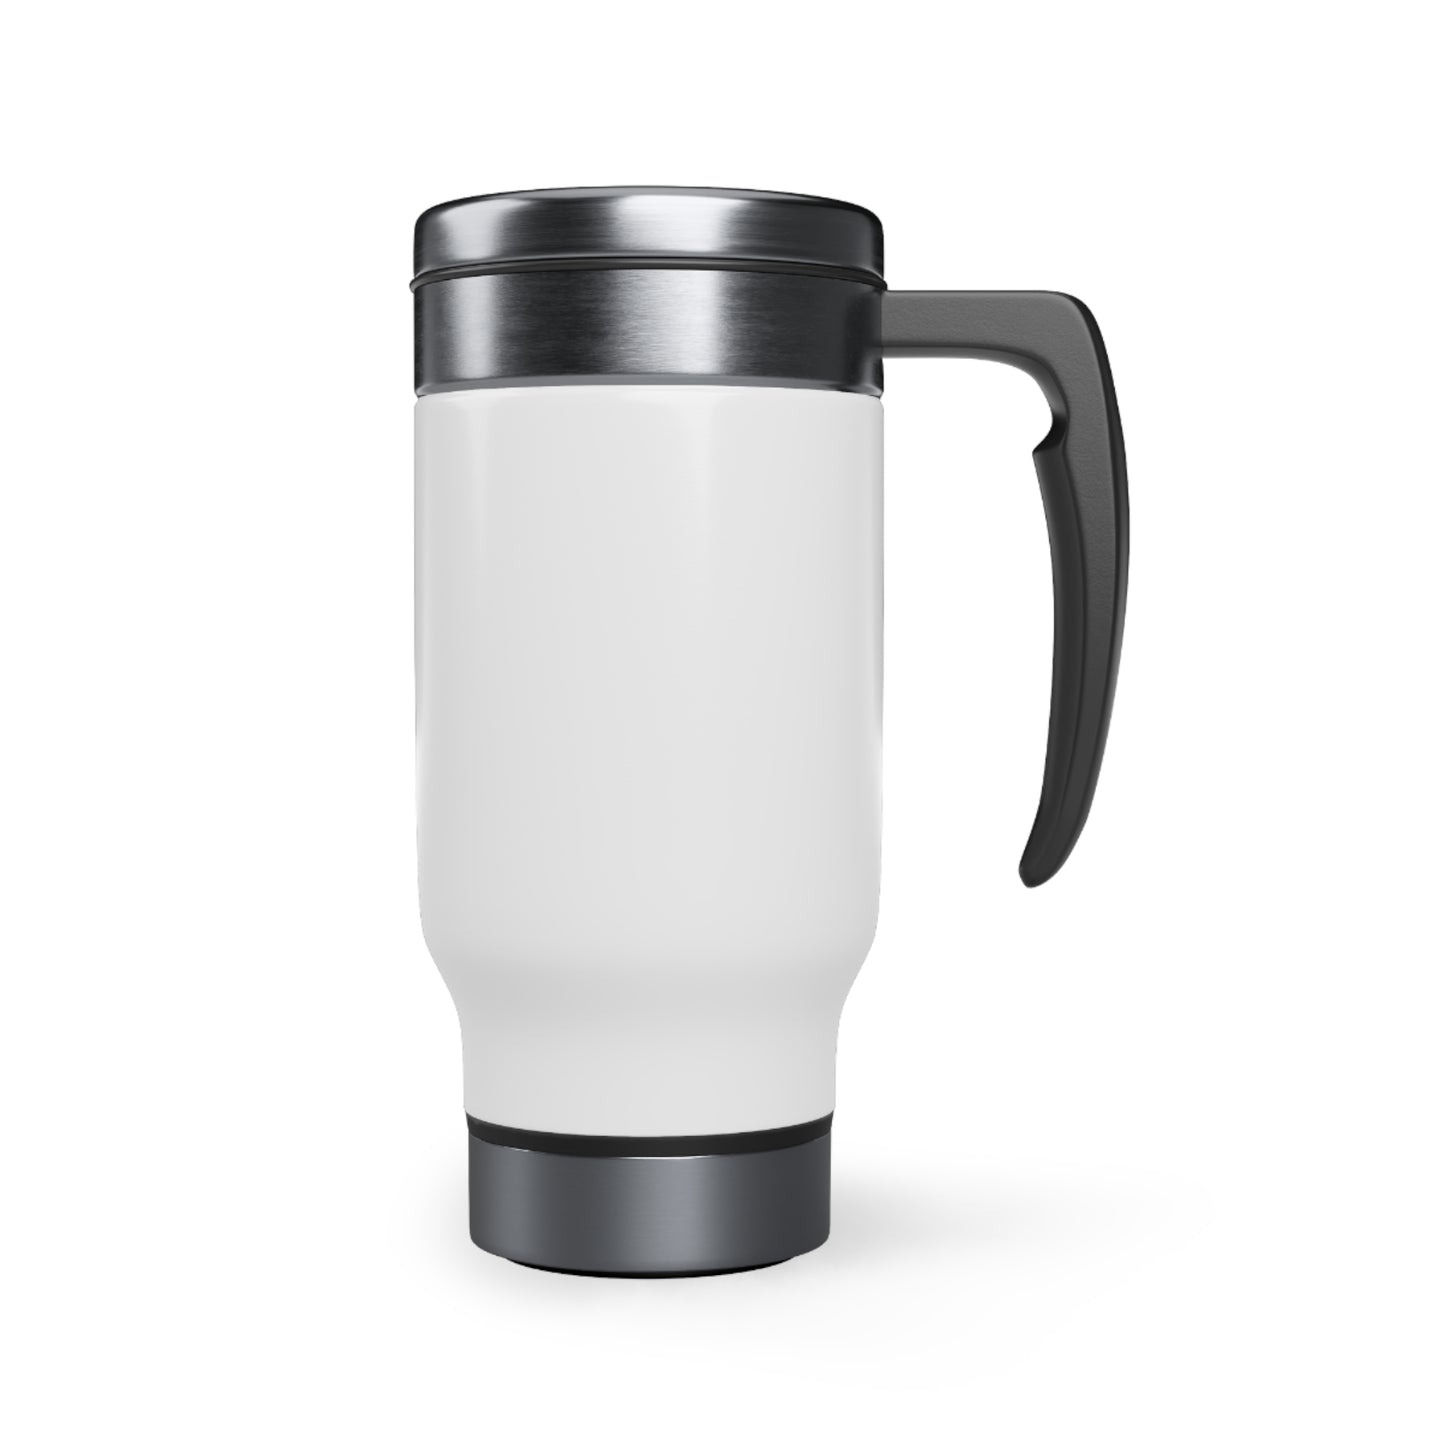 Jet Fuel Only Stainless Steel Travel Mug with Handle, 14oz | Equip Your Fave Pilot With This Sweet Coffee Cup